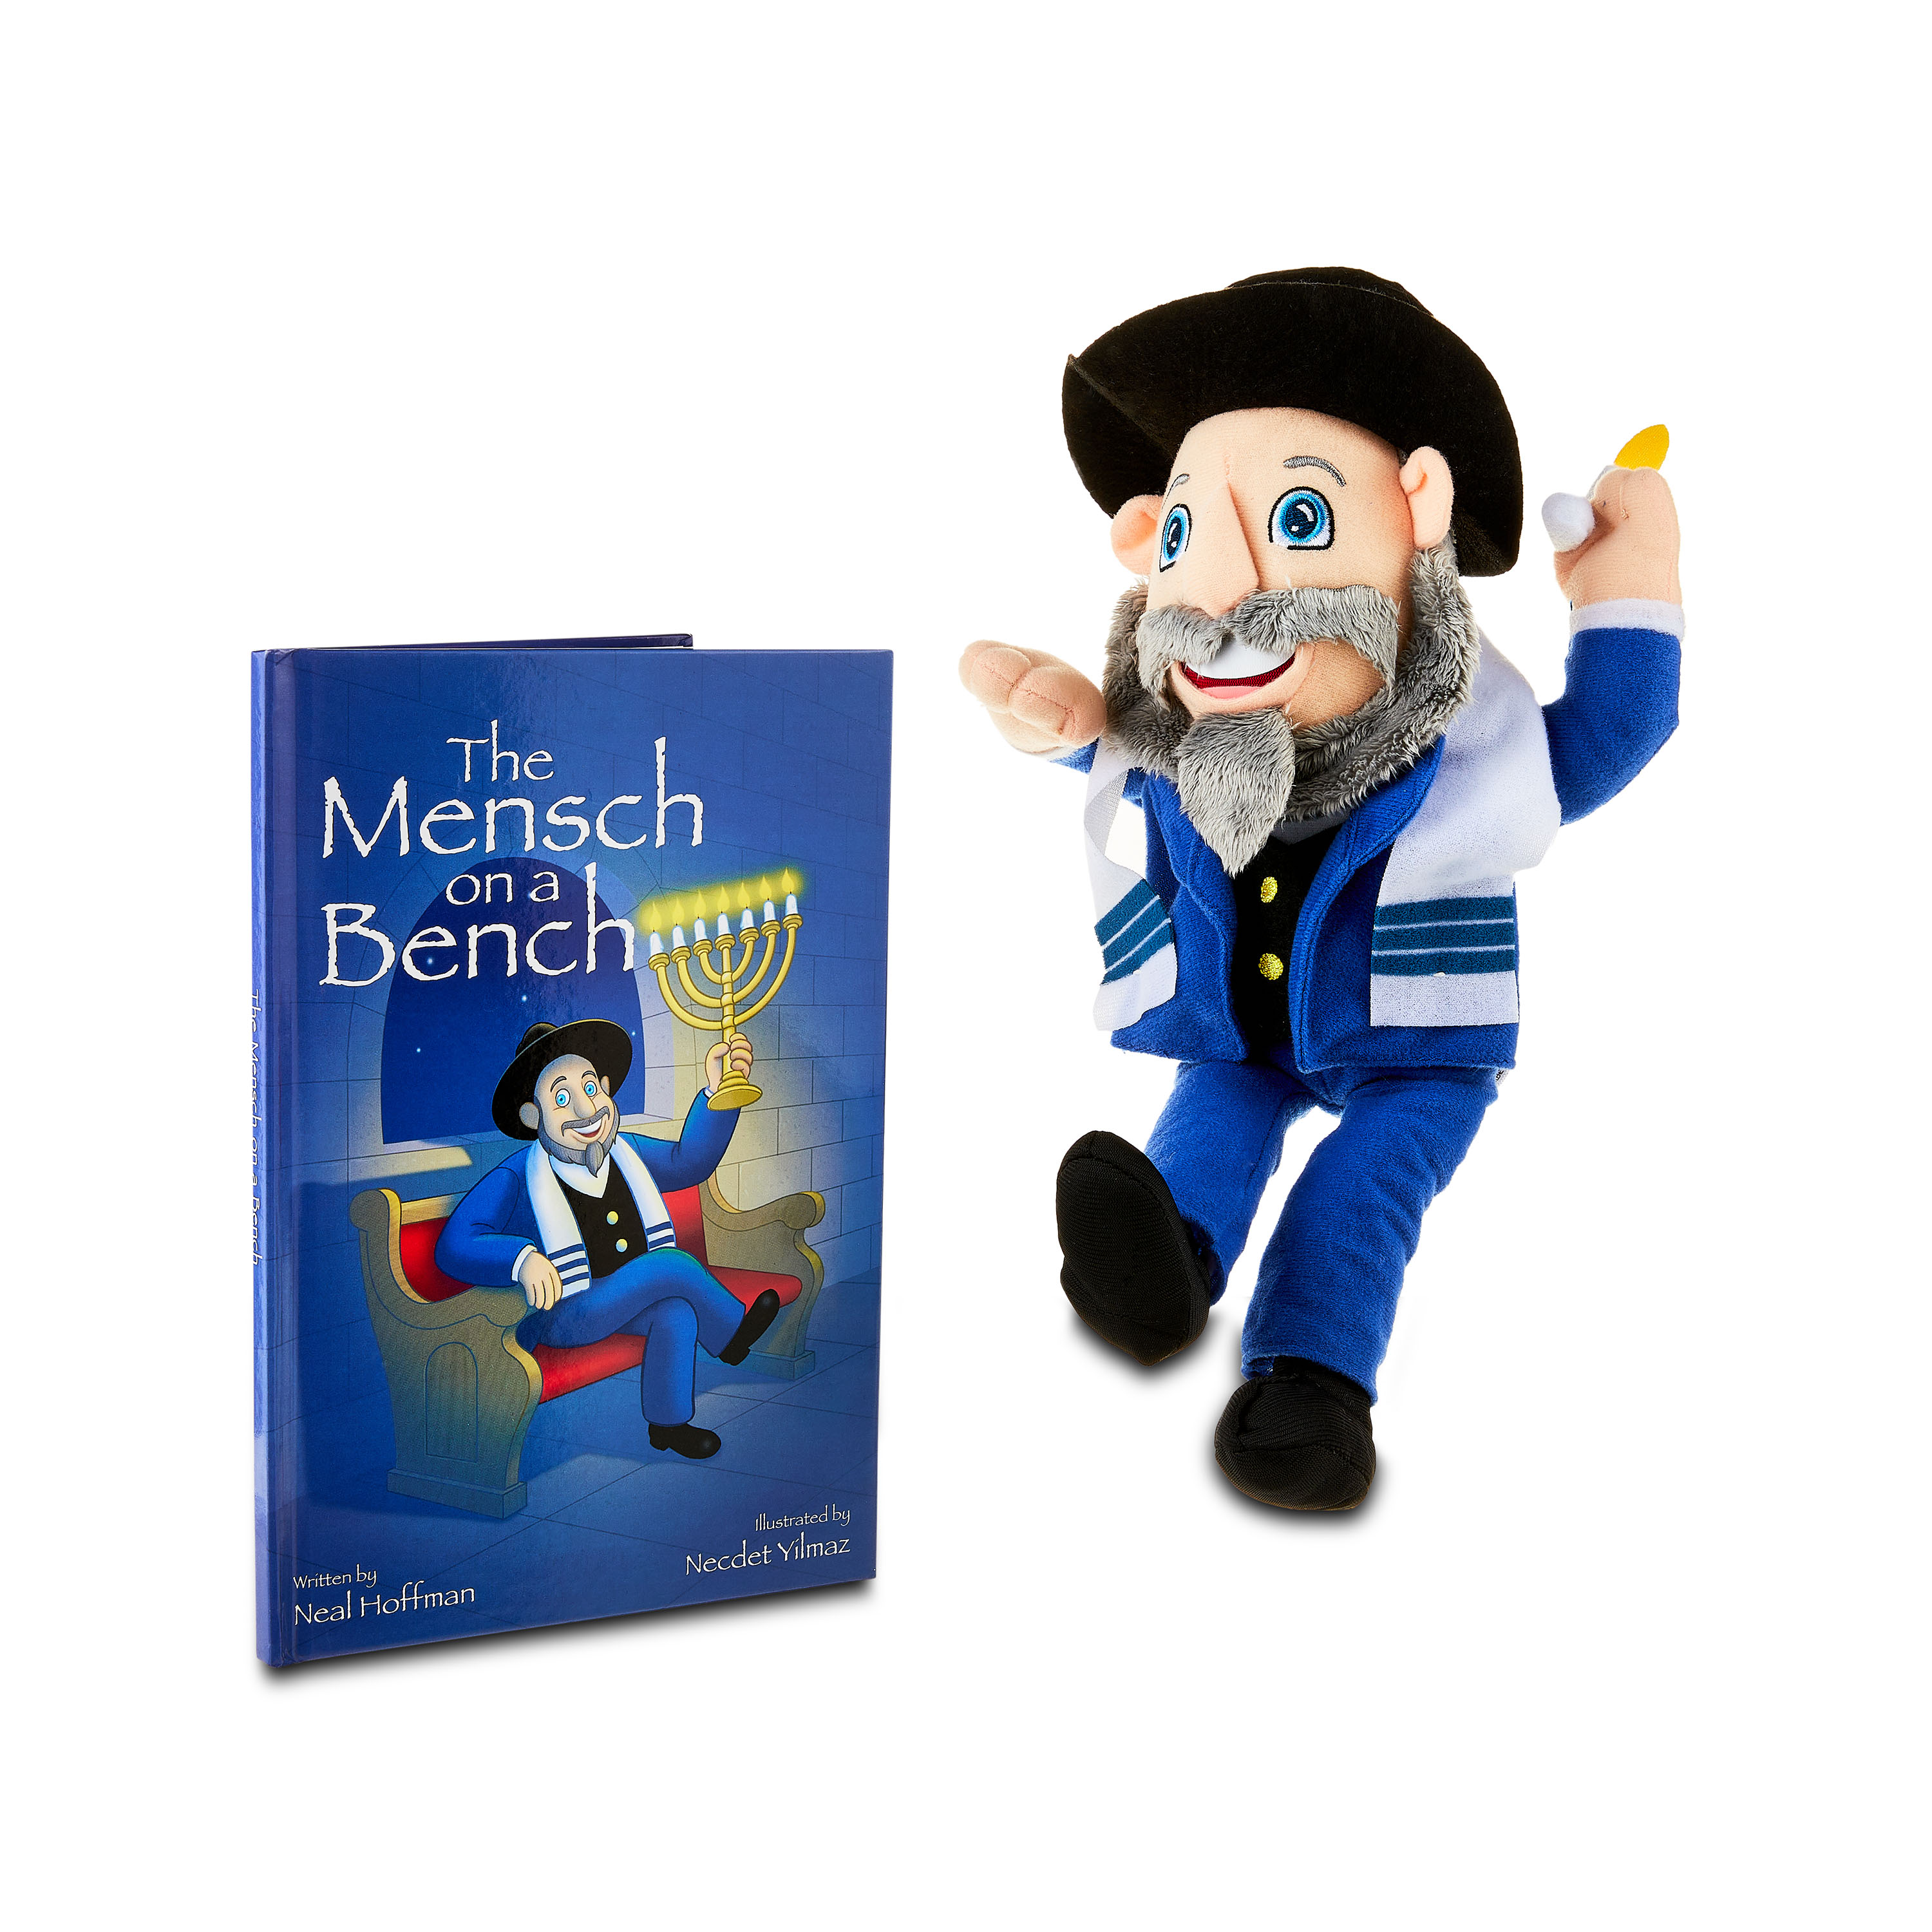 Mensch on a Bench 12" Hanukkah Moshe Plush Toy with Hardcover Book and Removable Bench - image 1 of 5